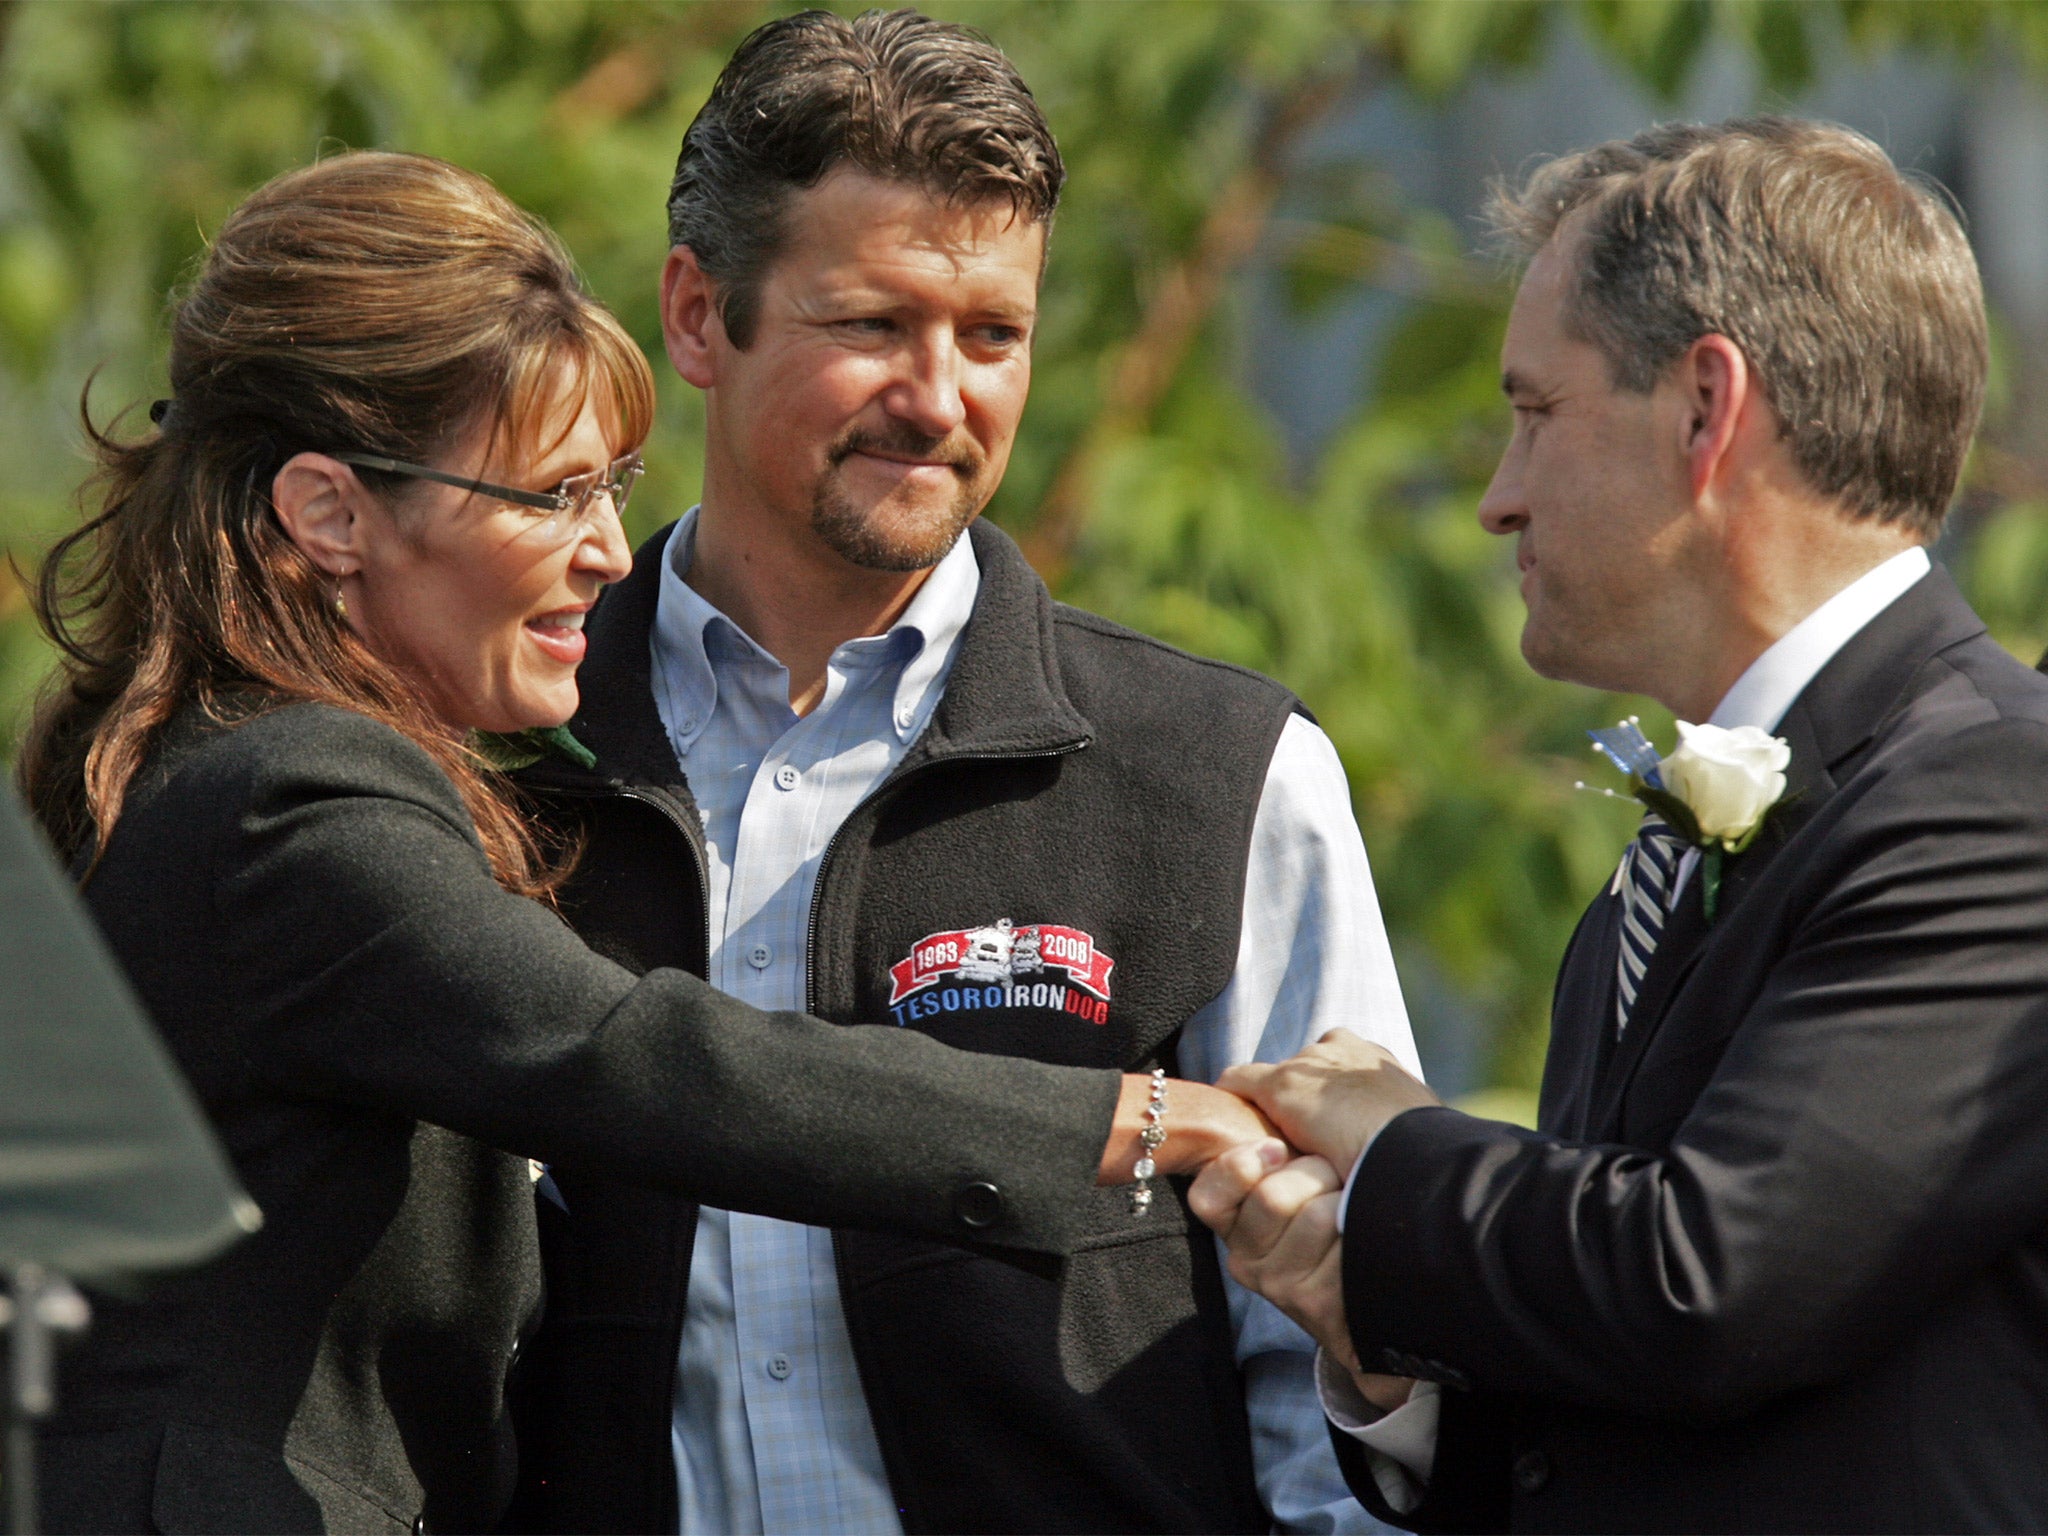 Sarah Palin, left, and her husband Todd, centre, congratulate incoming Governor Sean Parnell in 2009. Palin now opposes him